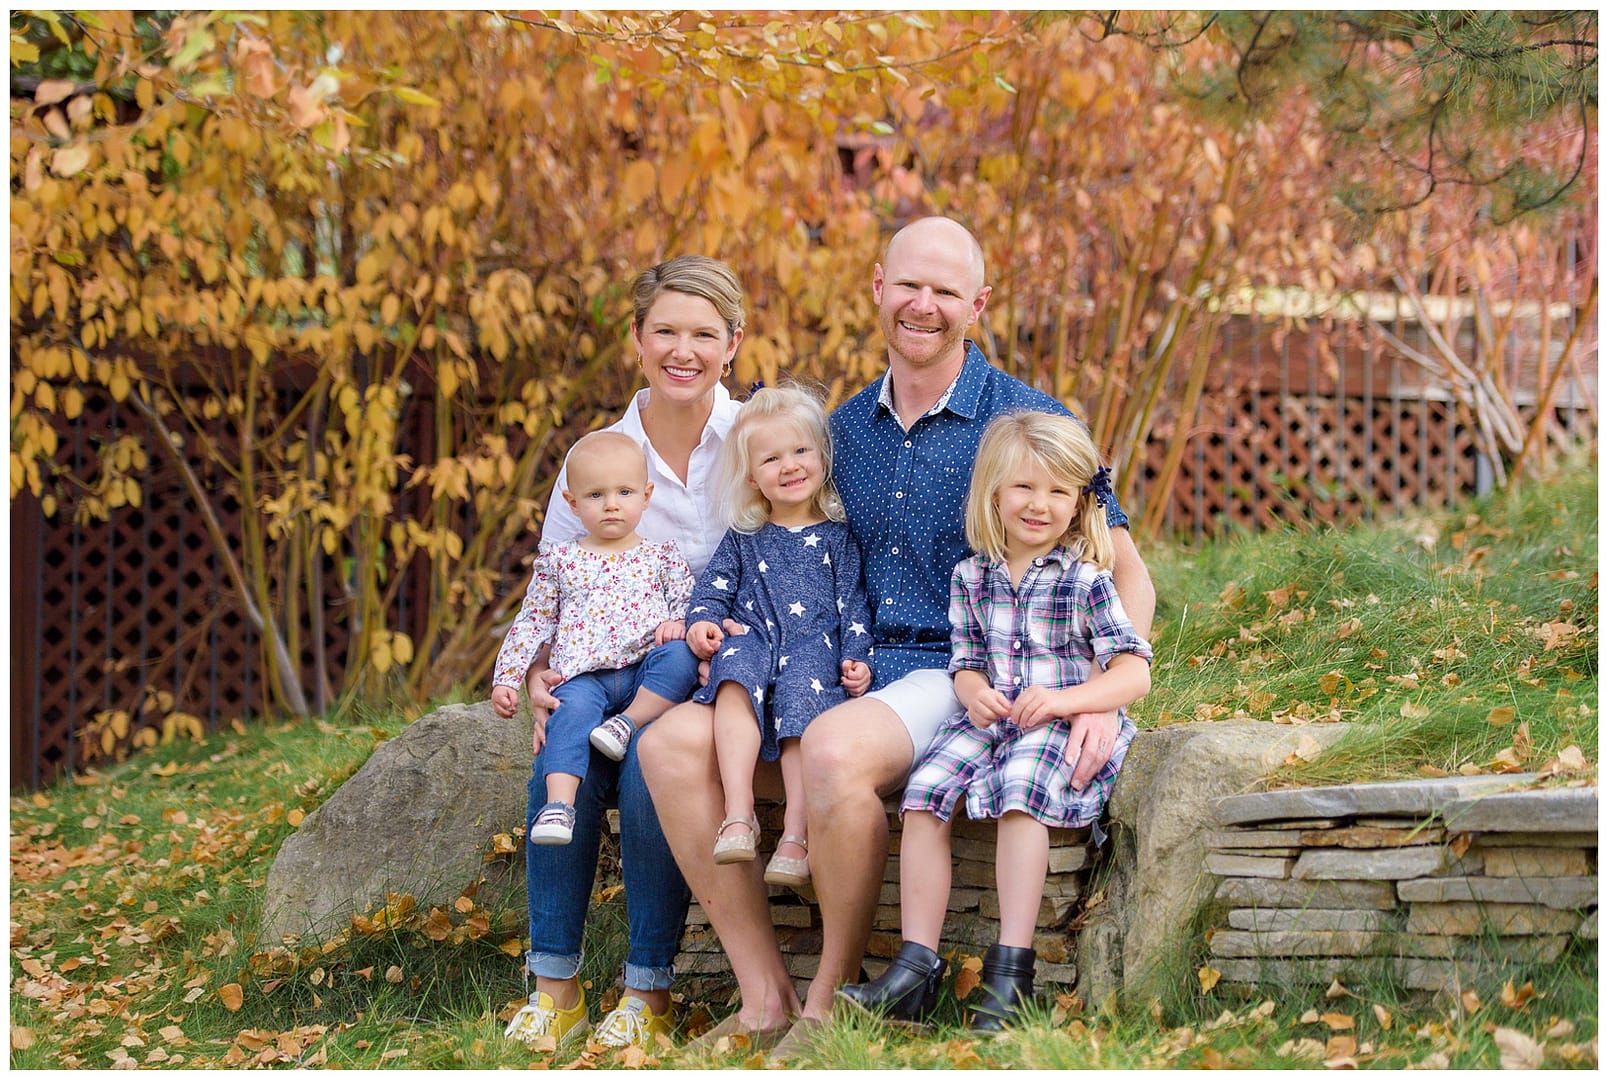 Boise family of five pose for portrait. Photo by Tiffany Hix Photography